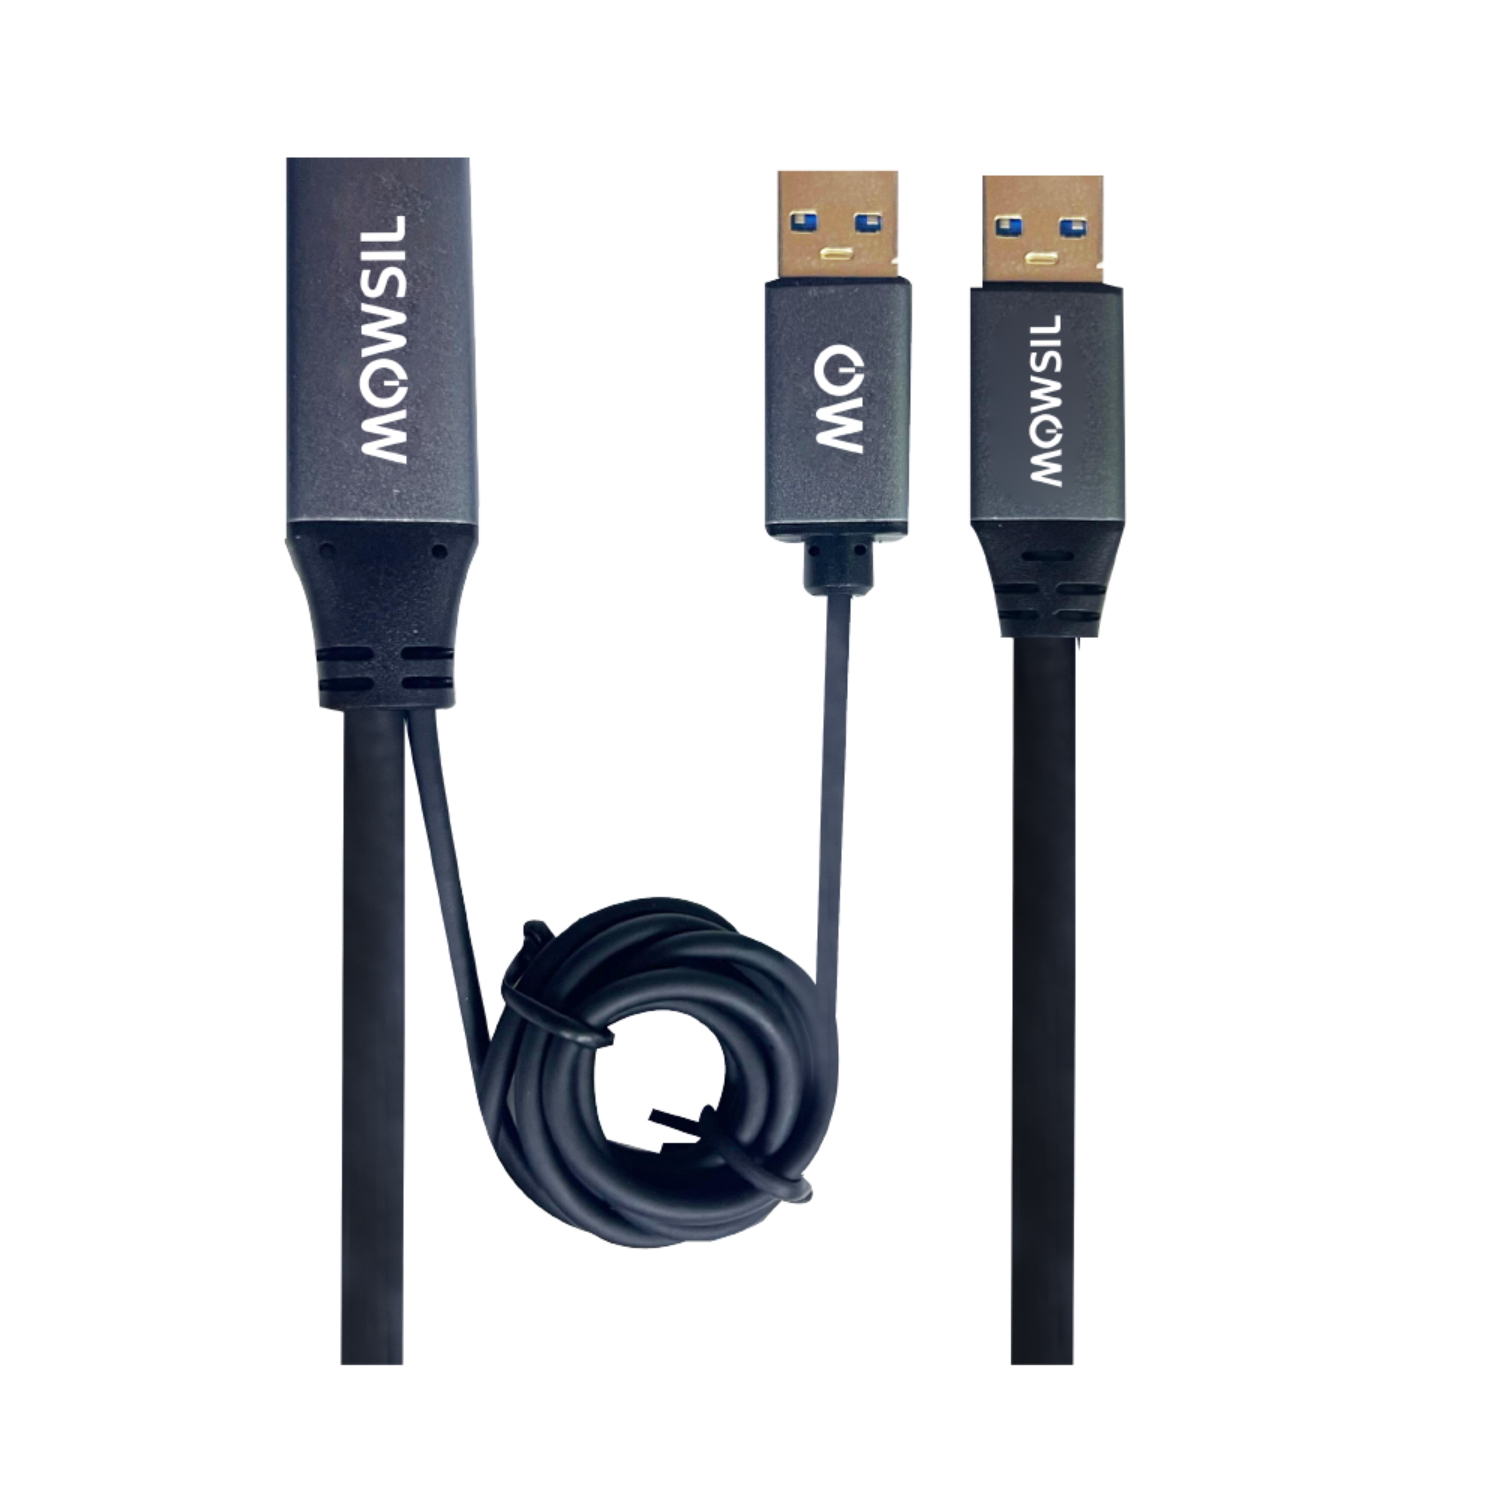 Mowsil USB 3.0 Extension Cable USB Powered 10Mtr